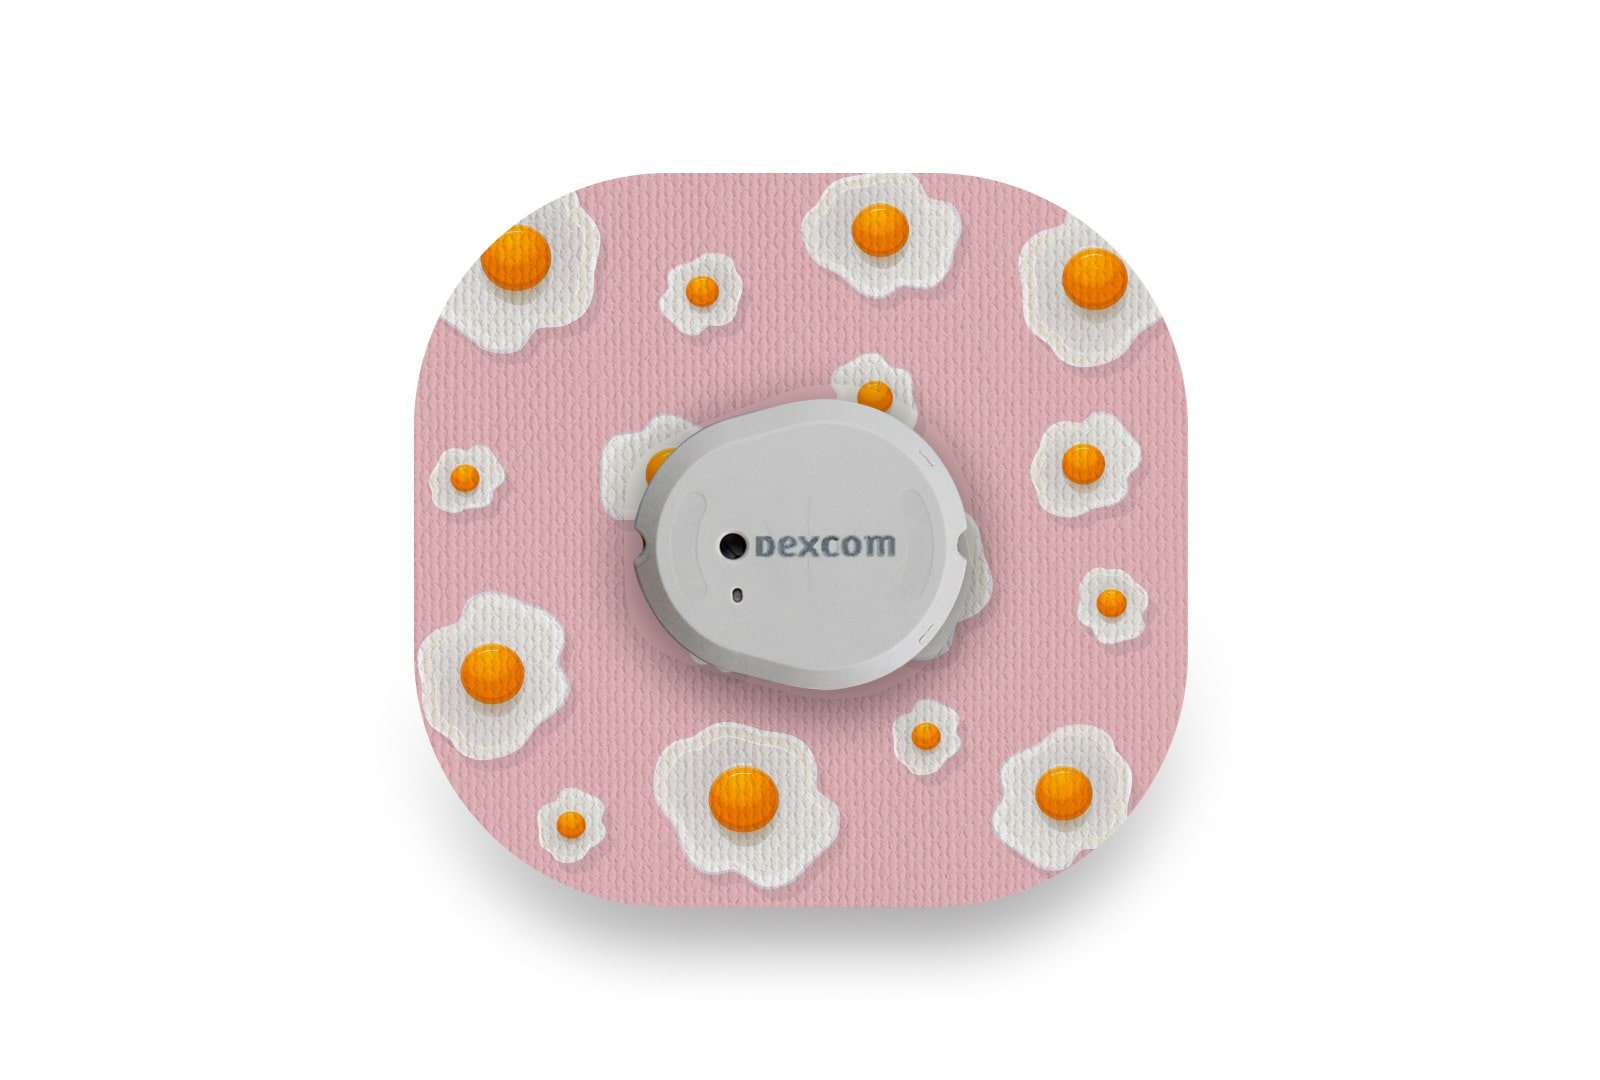 Fried Egg Patch for Dexcom G7 / One+ diabetes CGMs and insulin pumps